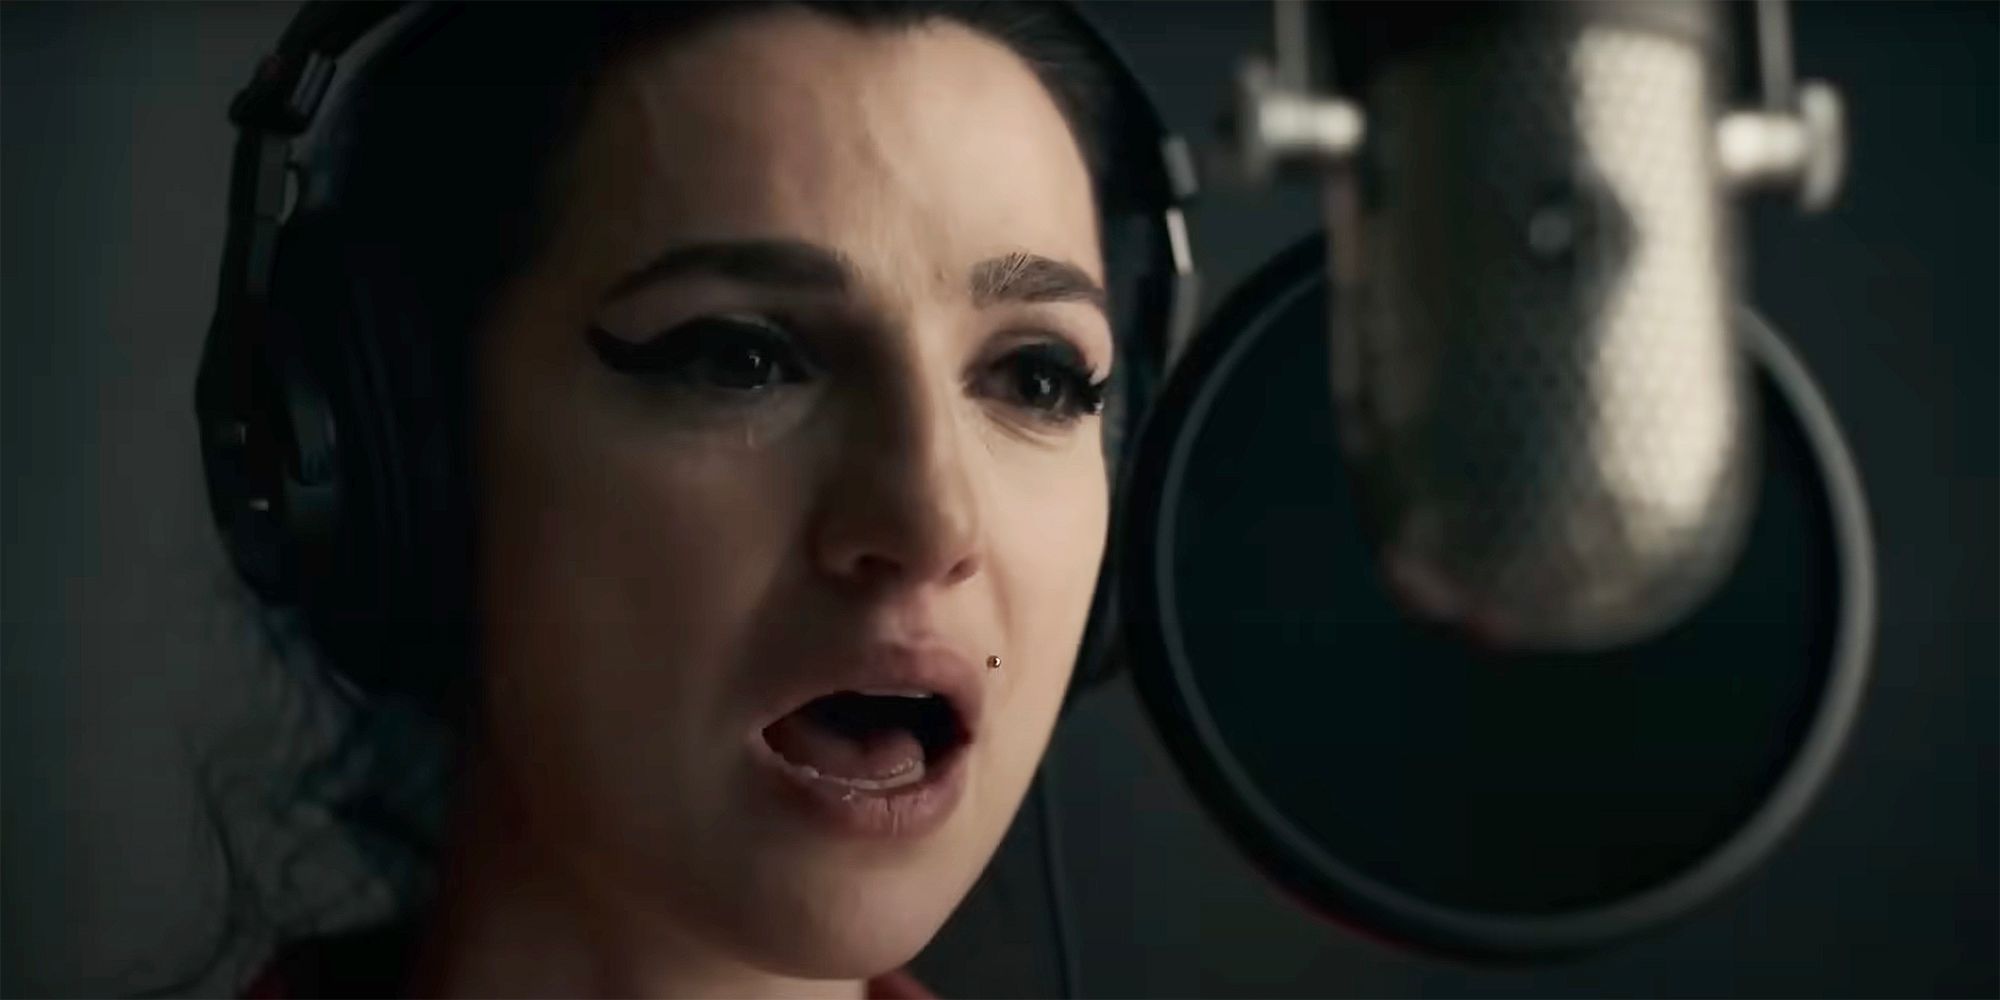 Back To Black Review: Superficial, Frustrating Biopic Never Properly Explores Amy Winehouse